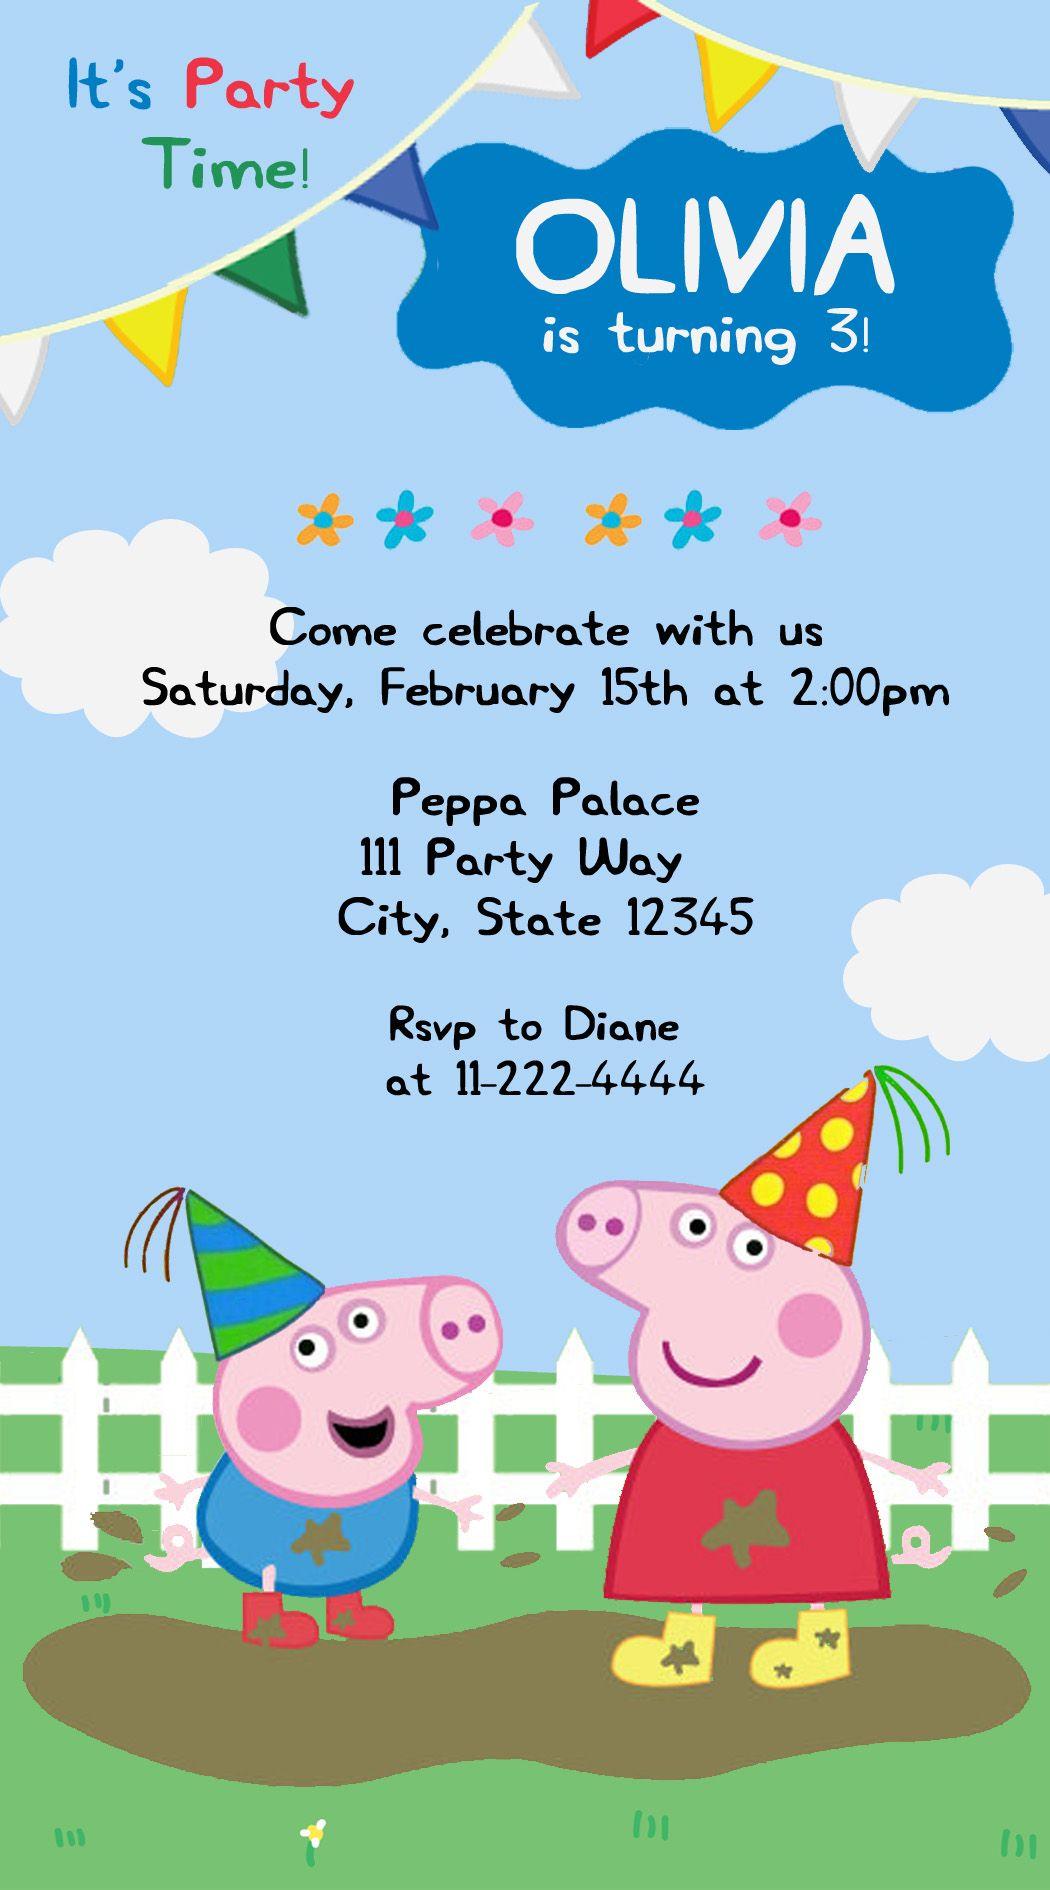 Peppa Pig invitations and more. Printed and mailed